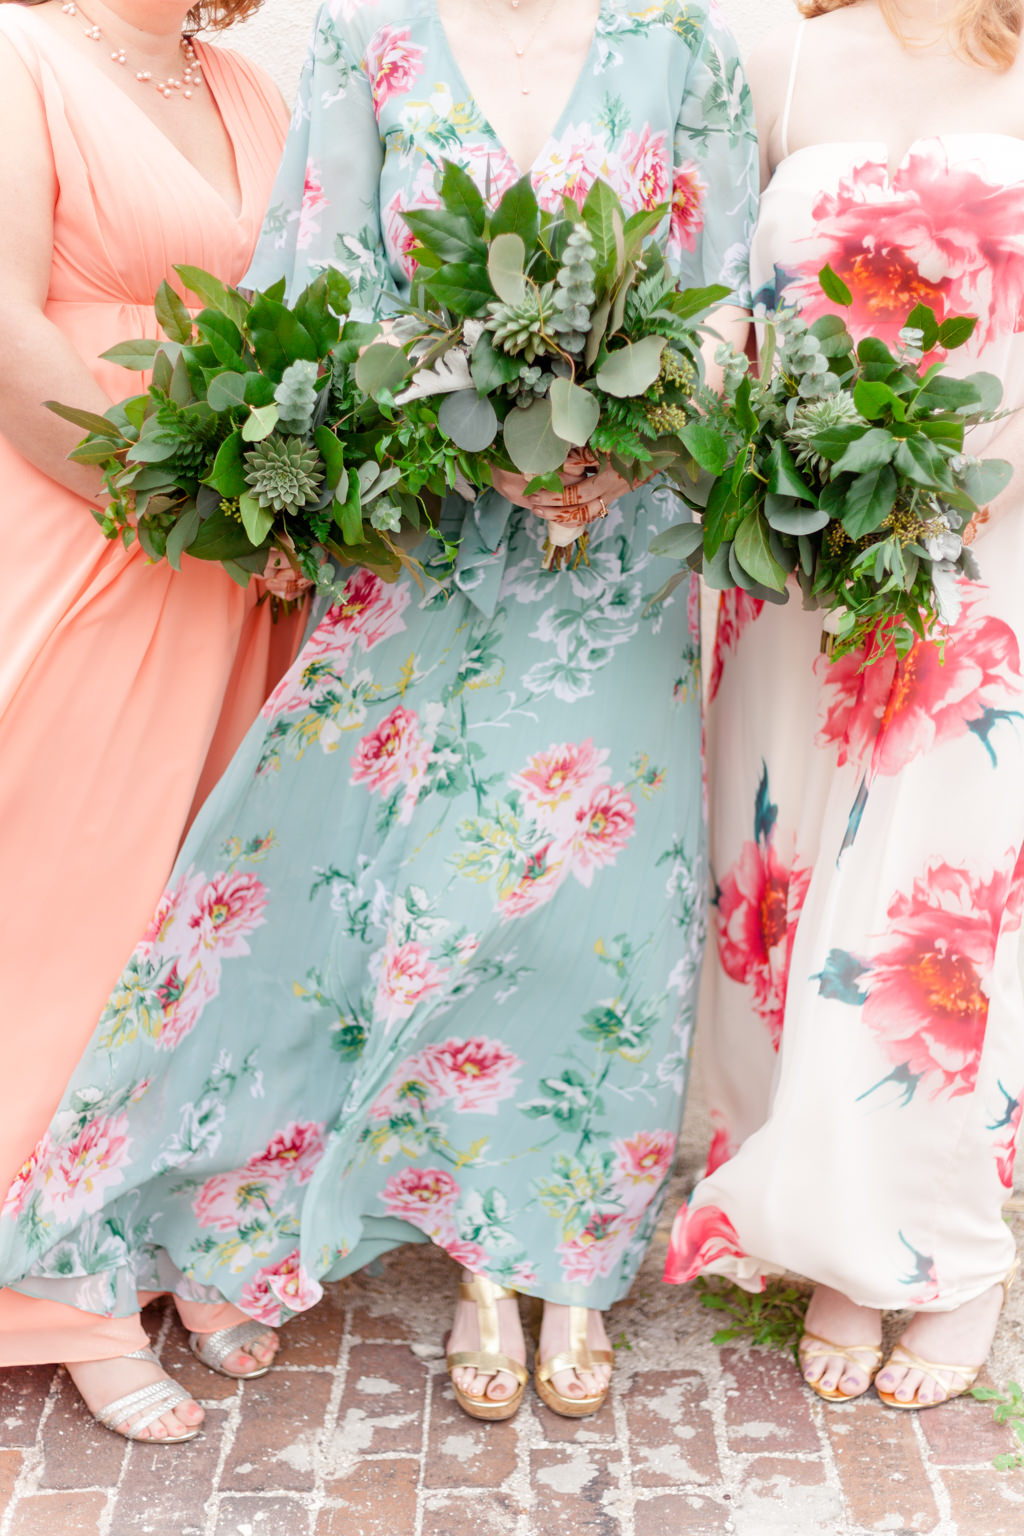 Outdoor Bridesmaid Portrait in Mismatched Peach, Pink and Green Floral Print Dresses with Greenery Bouquets | St Pete Wedding Florist Cotton and Magnolia